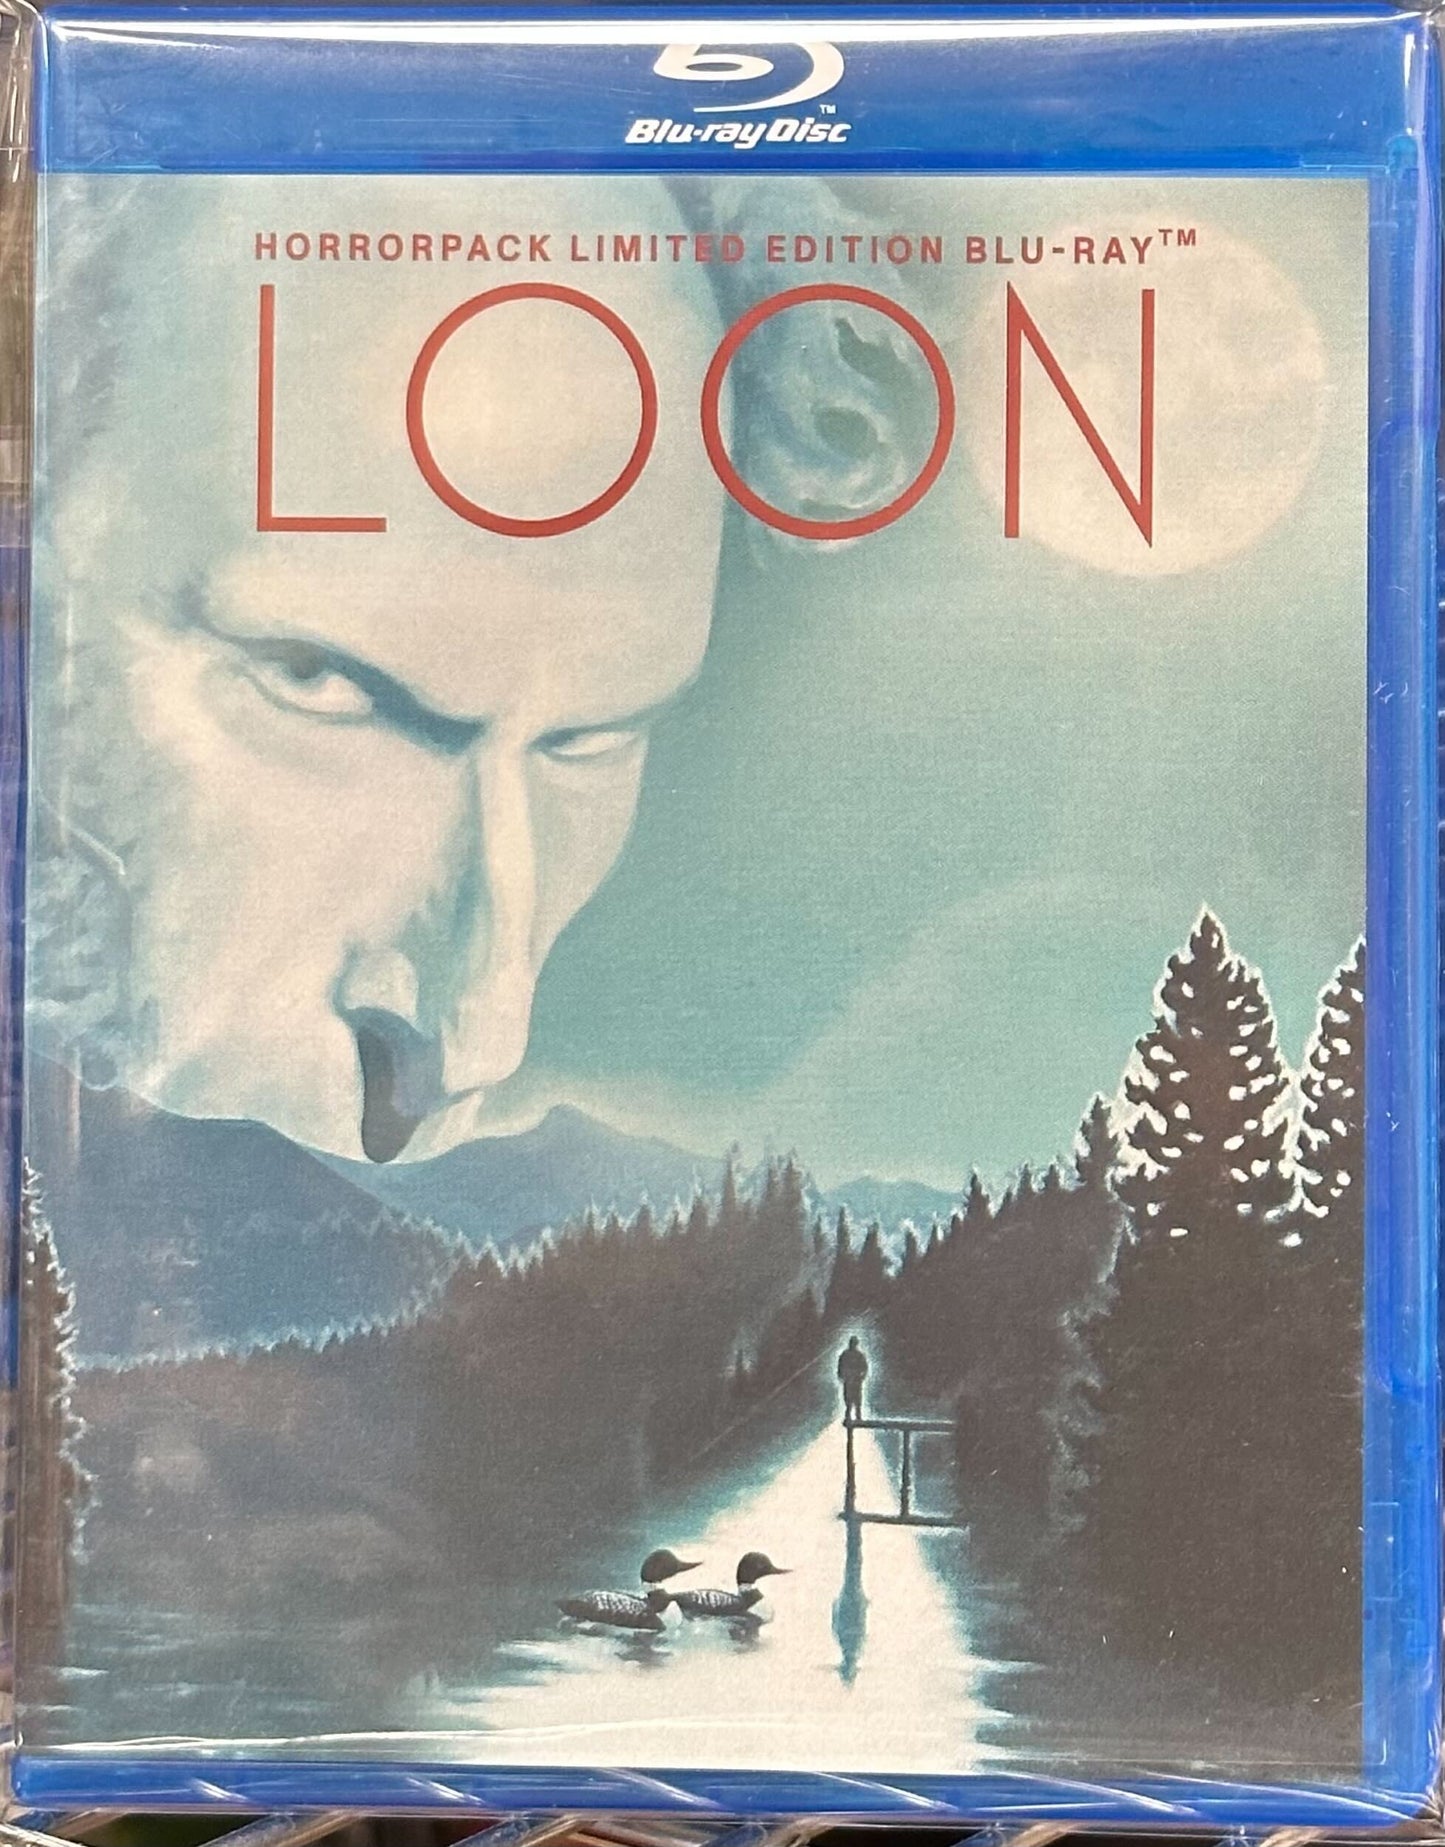 Loon - HorrorPack Limited Edition Blu-ray #85